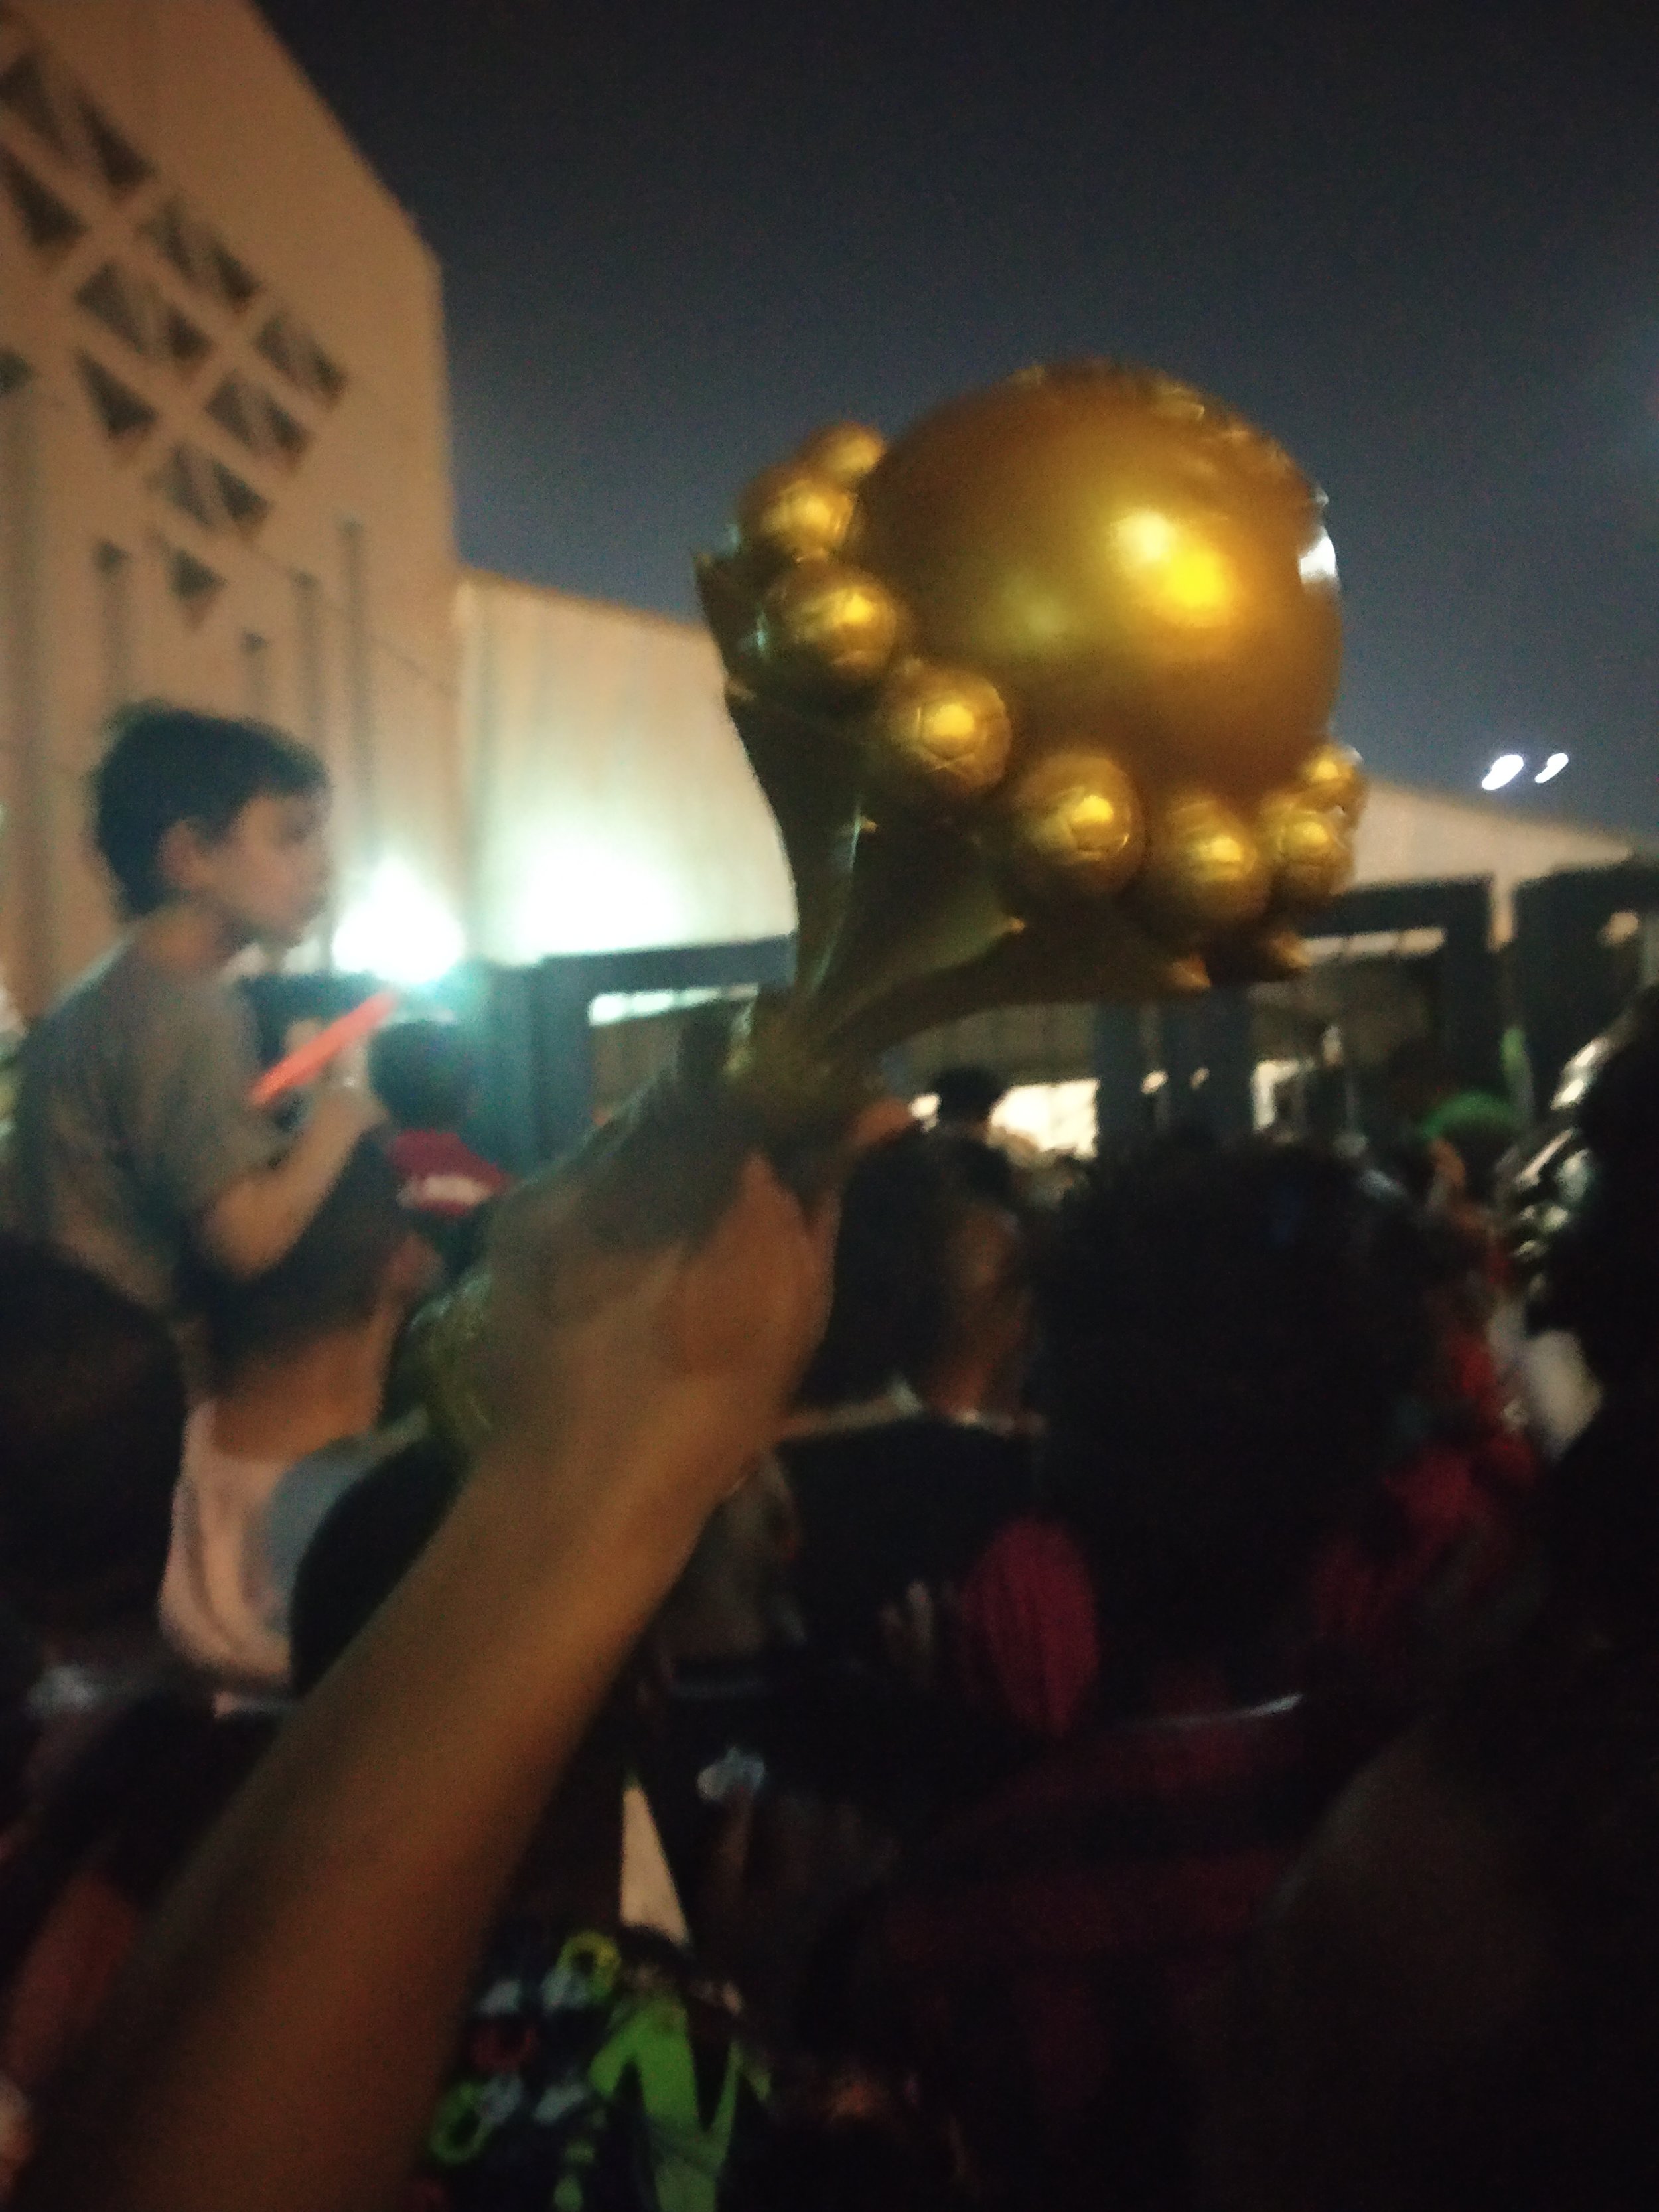  Replica trophy spotted in the crush 